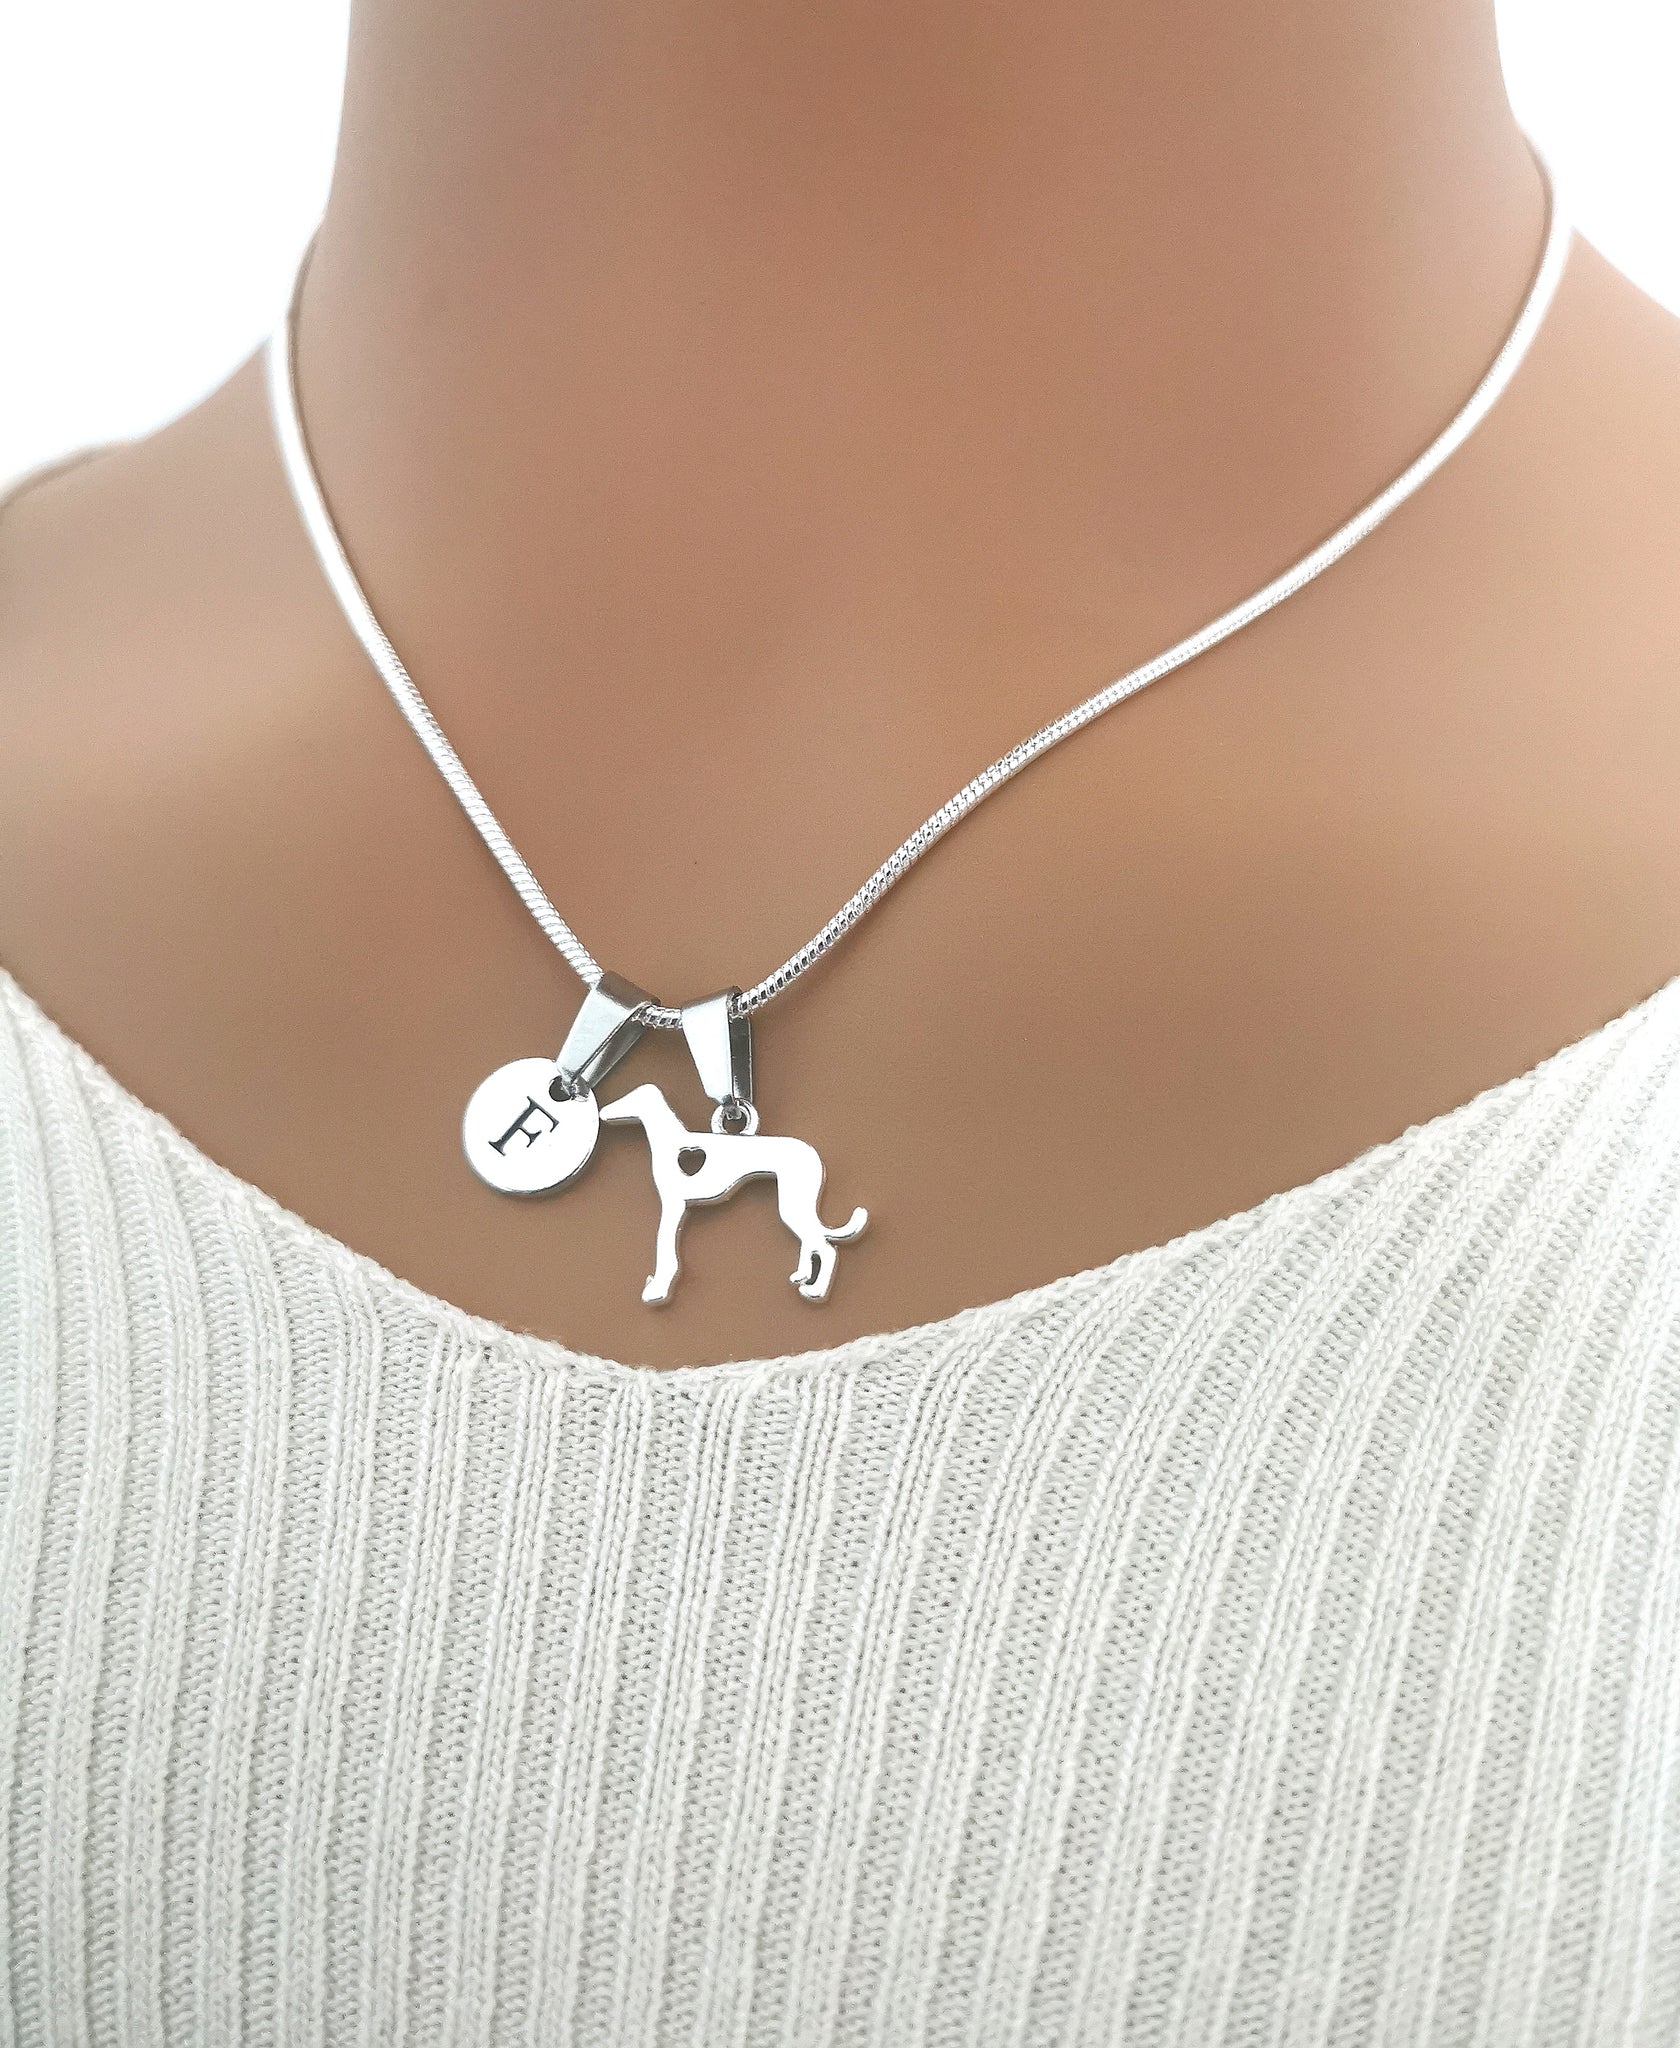 Silver Greyhound Necklace - Exquisite Dog Charm Gift with 18" Length - Ideal for Dog Lovers - YouLoveYouShop